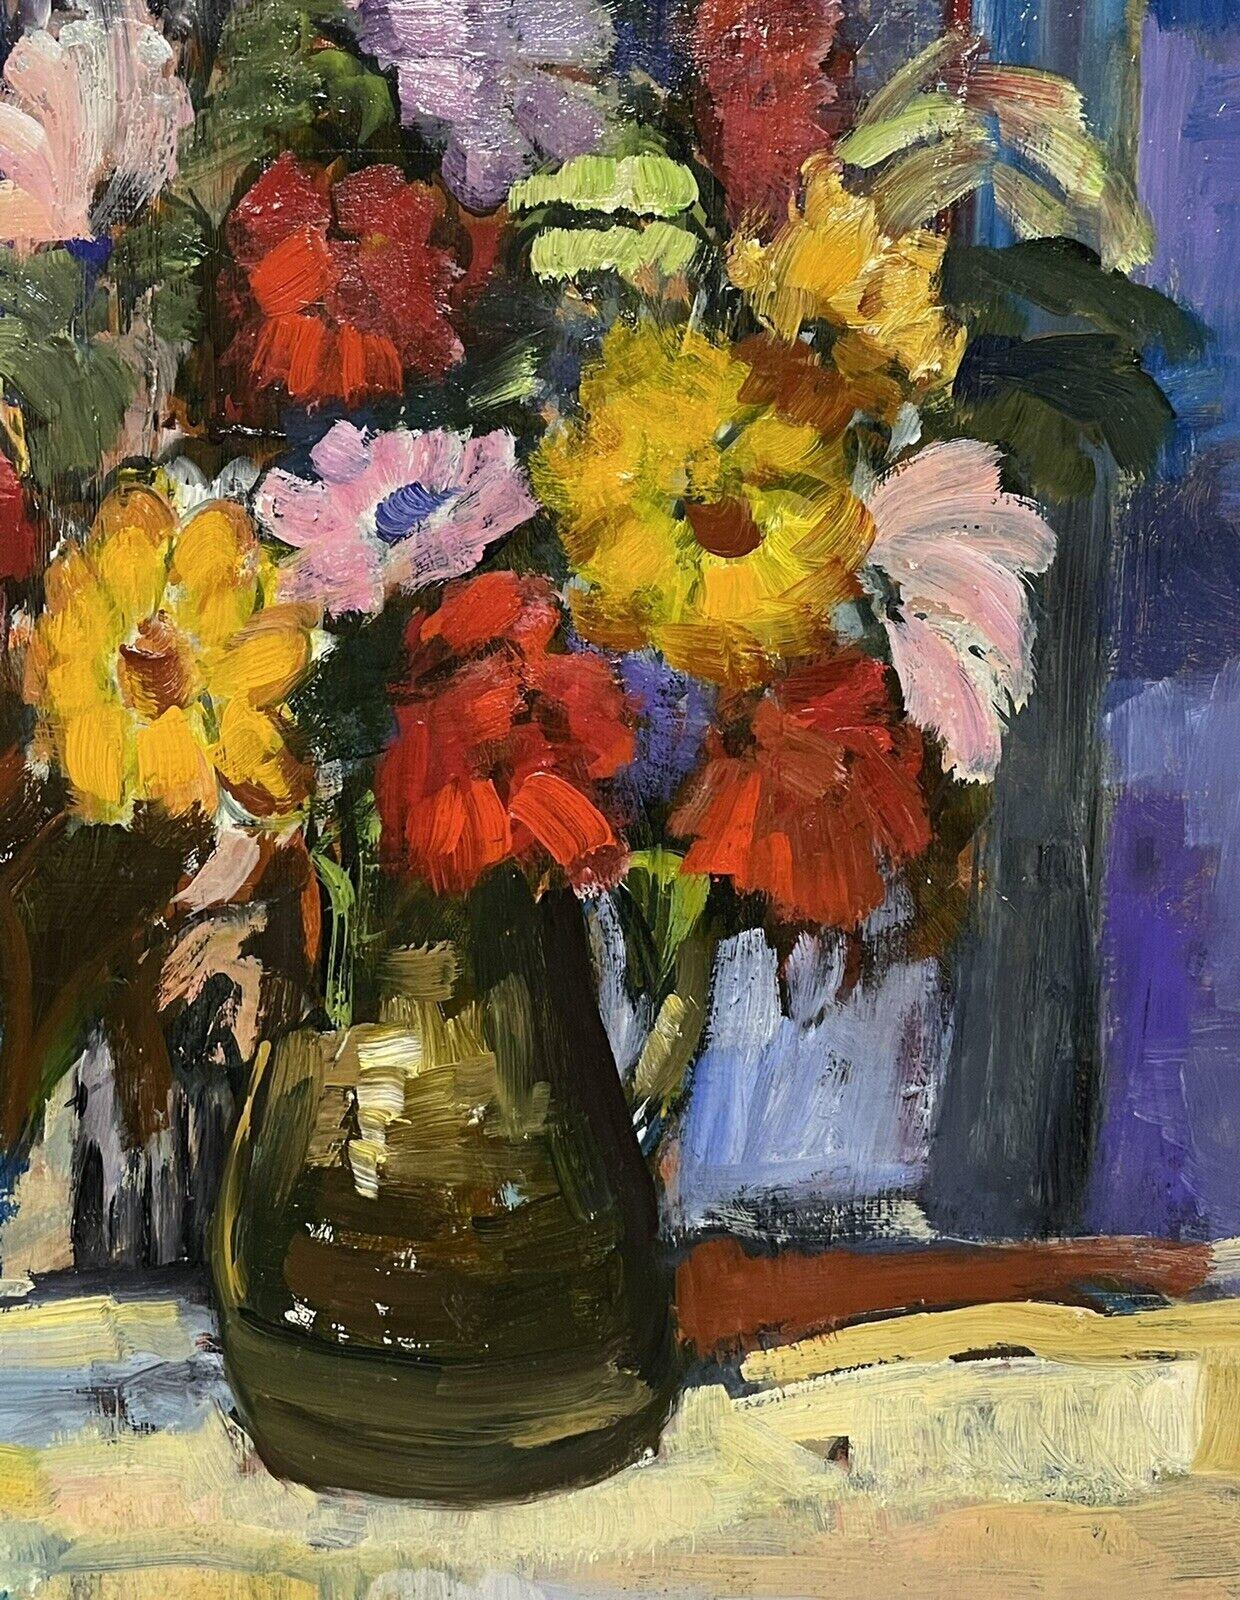 Artist/ School: French School, mid 20th century

Title: Colorful Still Life of Flowers in Vase

Medium:  oil painting on board, framed.

Size:

framed:   31  x  26.5 inches
painting:   24 x 19.5 inches

Provenance: private collection,